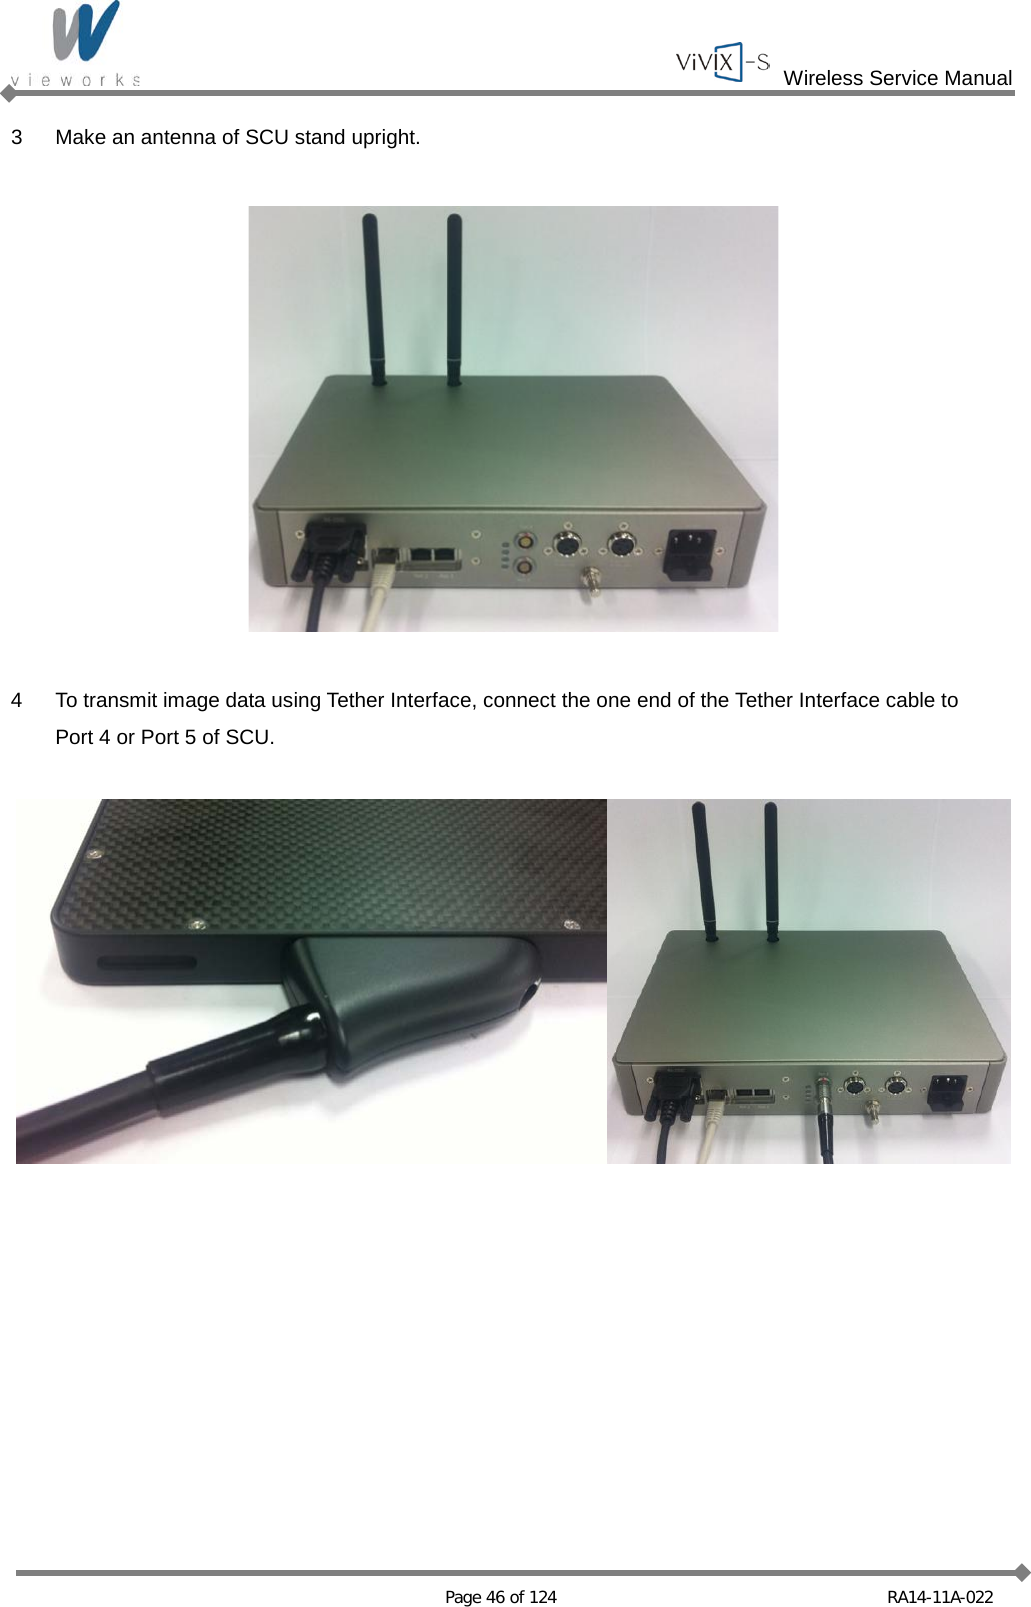  Wireless Service Manual   Page 46 of 124 RA14-11A-022 3  Make an antenna of SCU stand upright.    4  To transmit image data using Tether Interface, connect the one end of the Tether Interface cable to   Port 4 or Port 5 of SCU.    